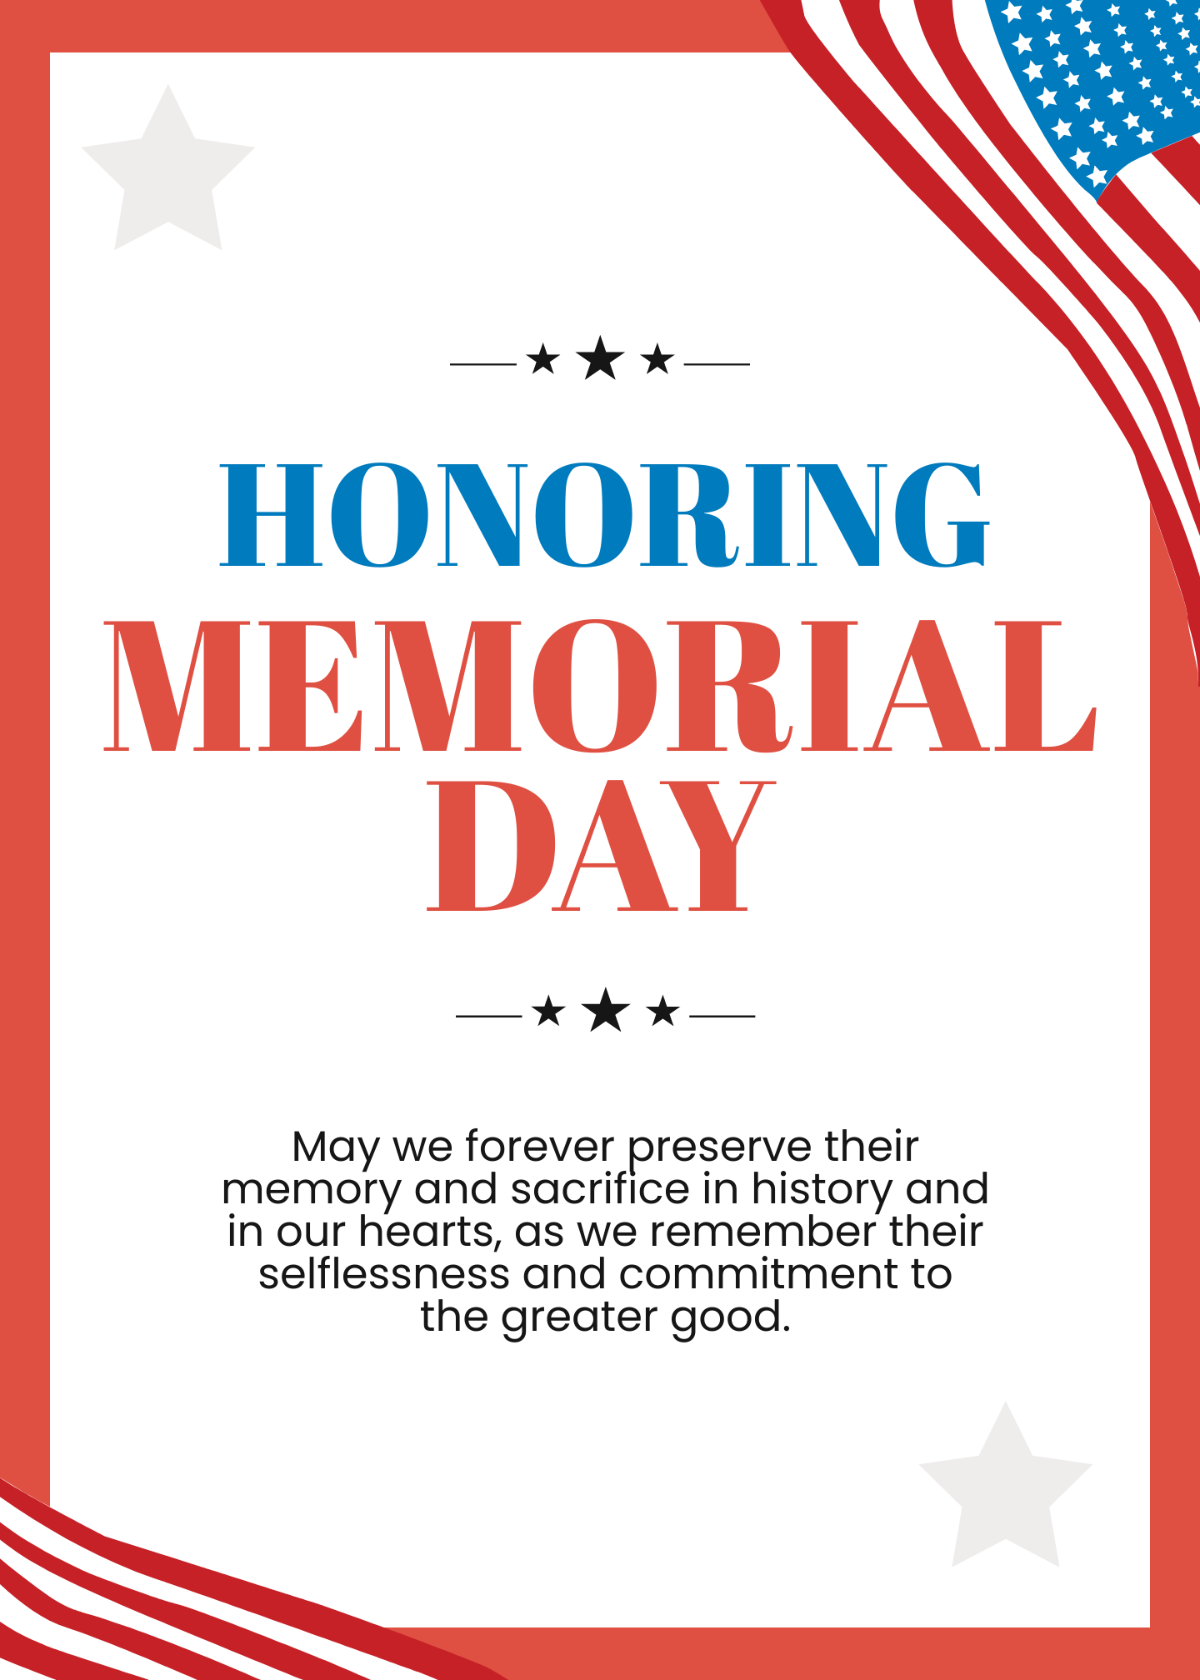 Memorial Day Special Message Template